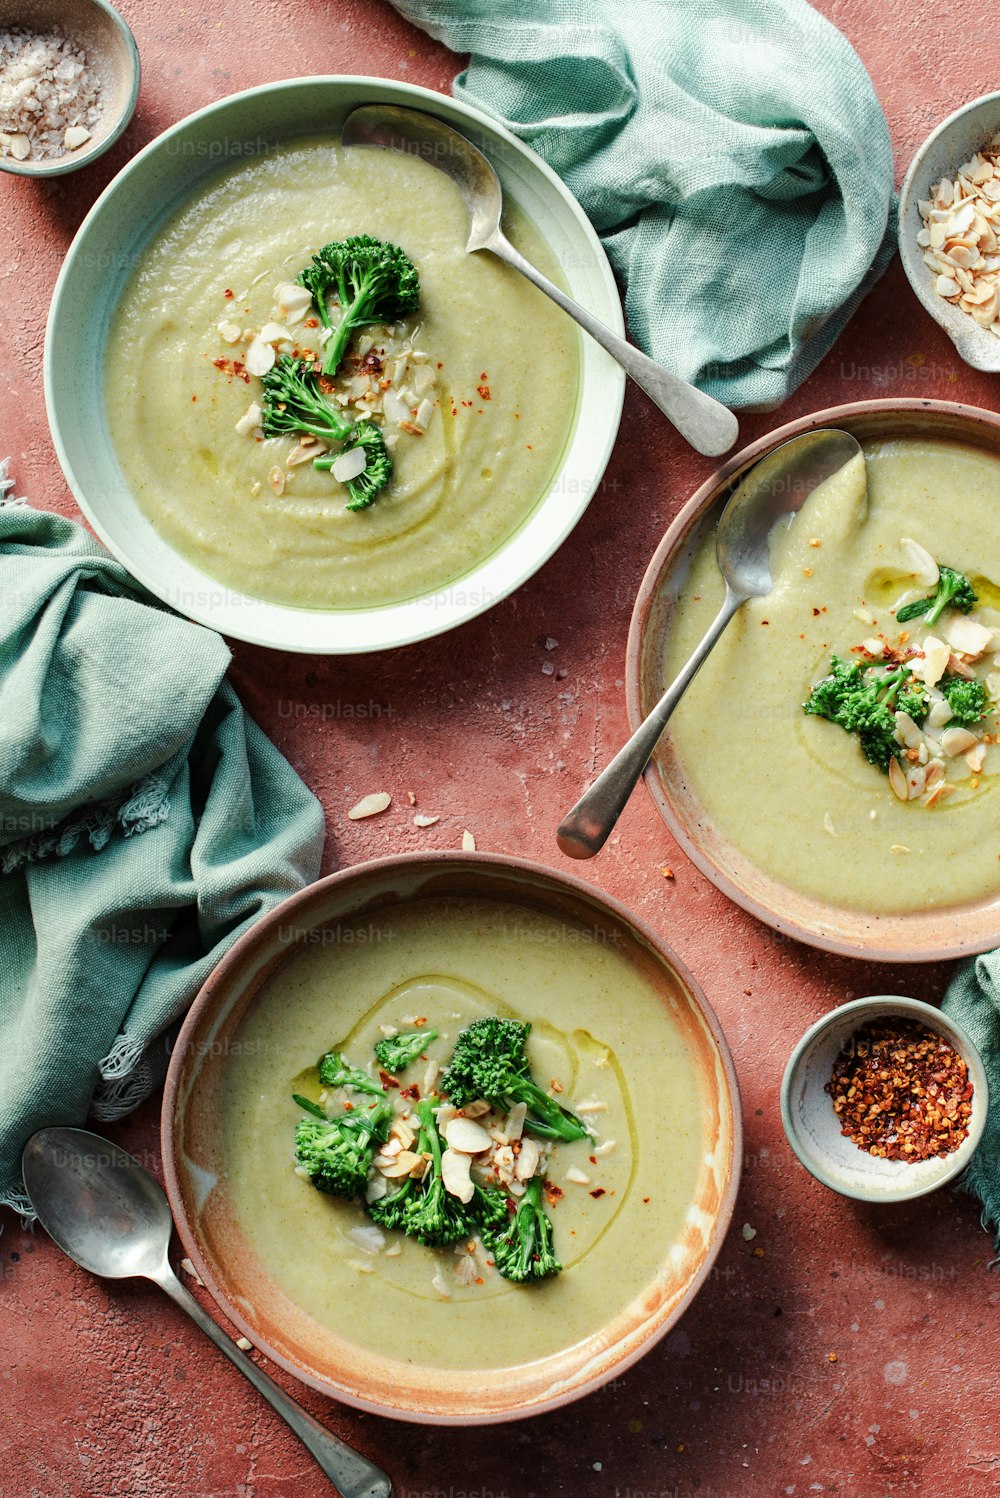 three bowls of soup with broccoli and other toppings